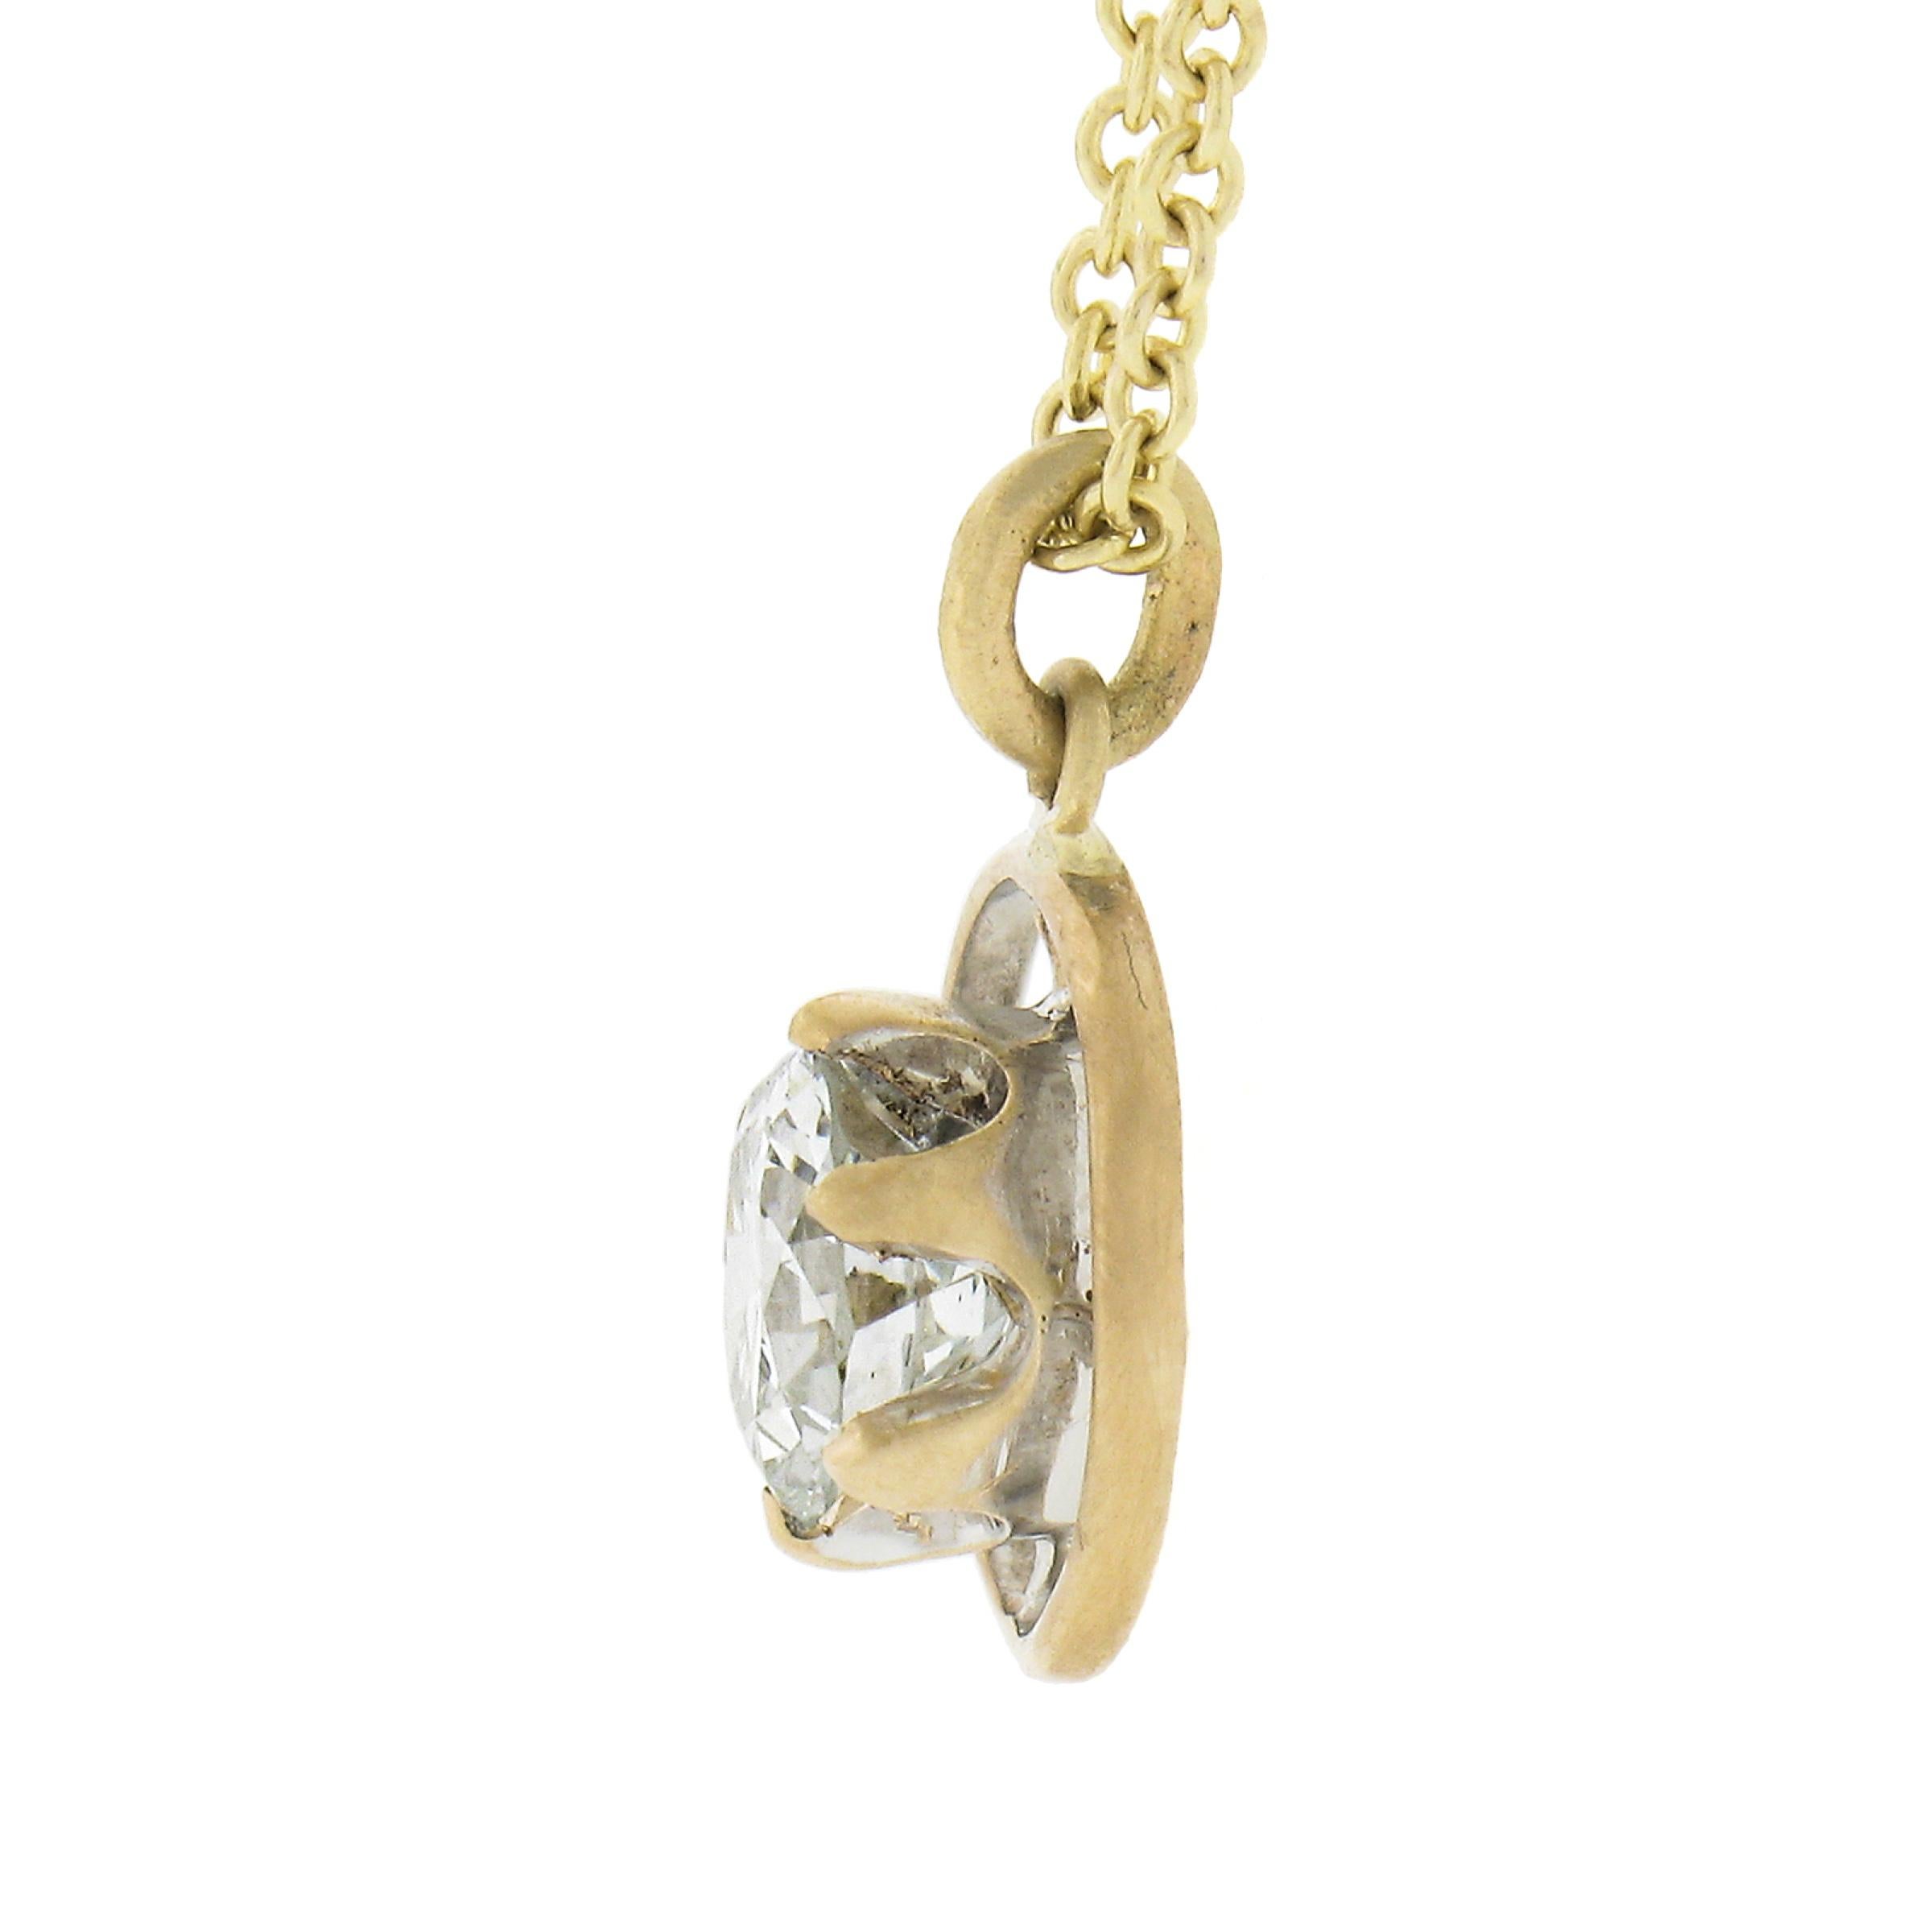 Antique 14k Gold .69ct GIA Round Prong Diamond Solitaire Target Pendant & Chain For Sale 1